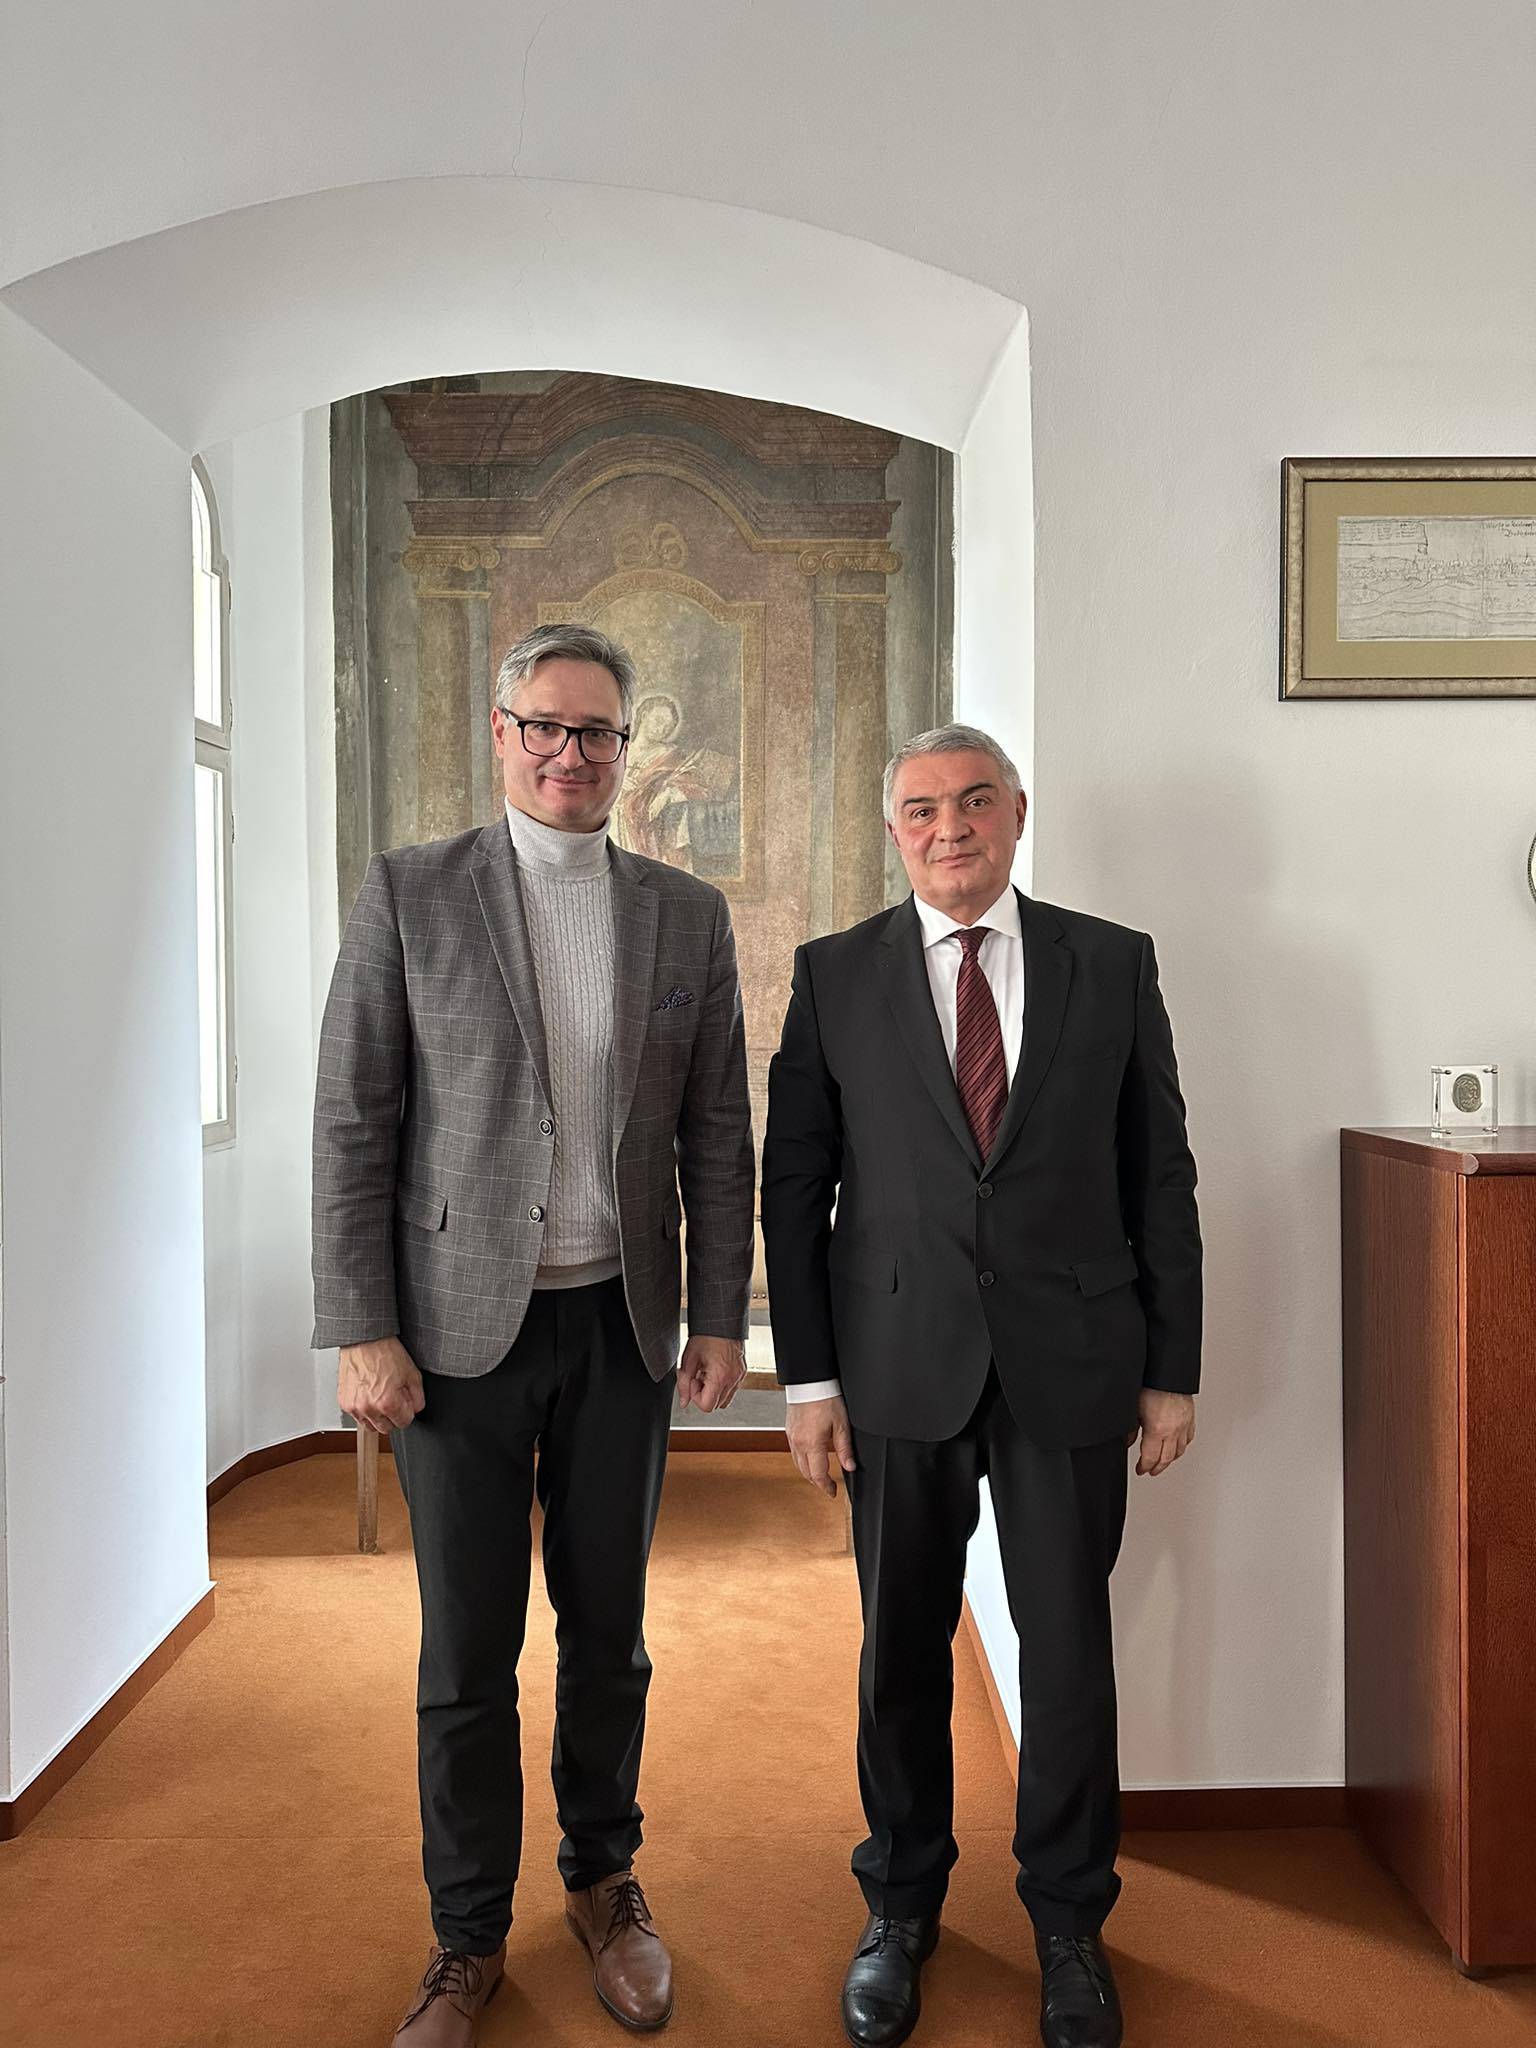 Ambassador Ashot Hovakimian was received by the Chairman of the European Affairs Committee of the Chamber of Deputies of the Czech Parliament Ondřej Benešík